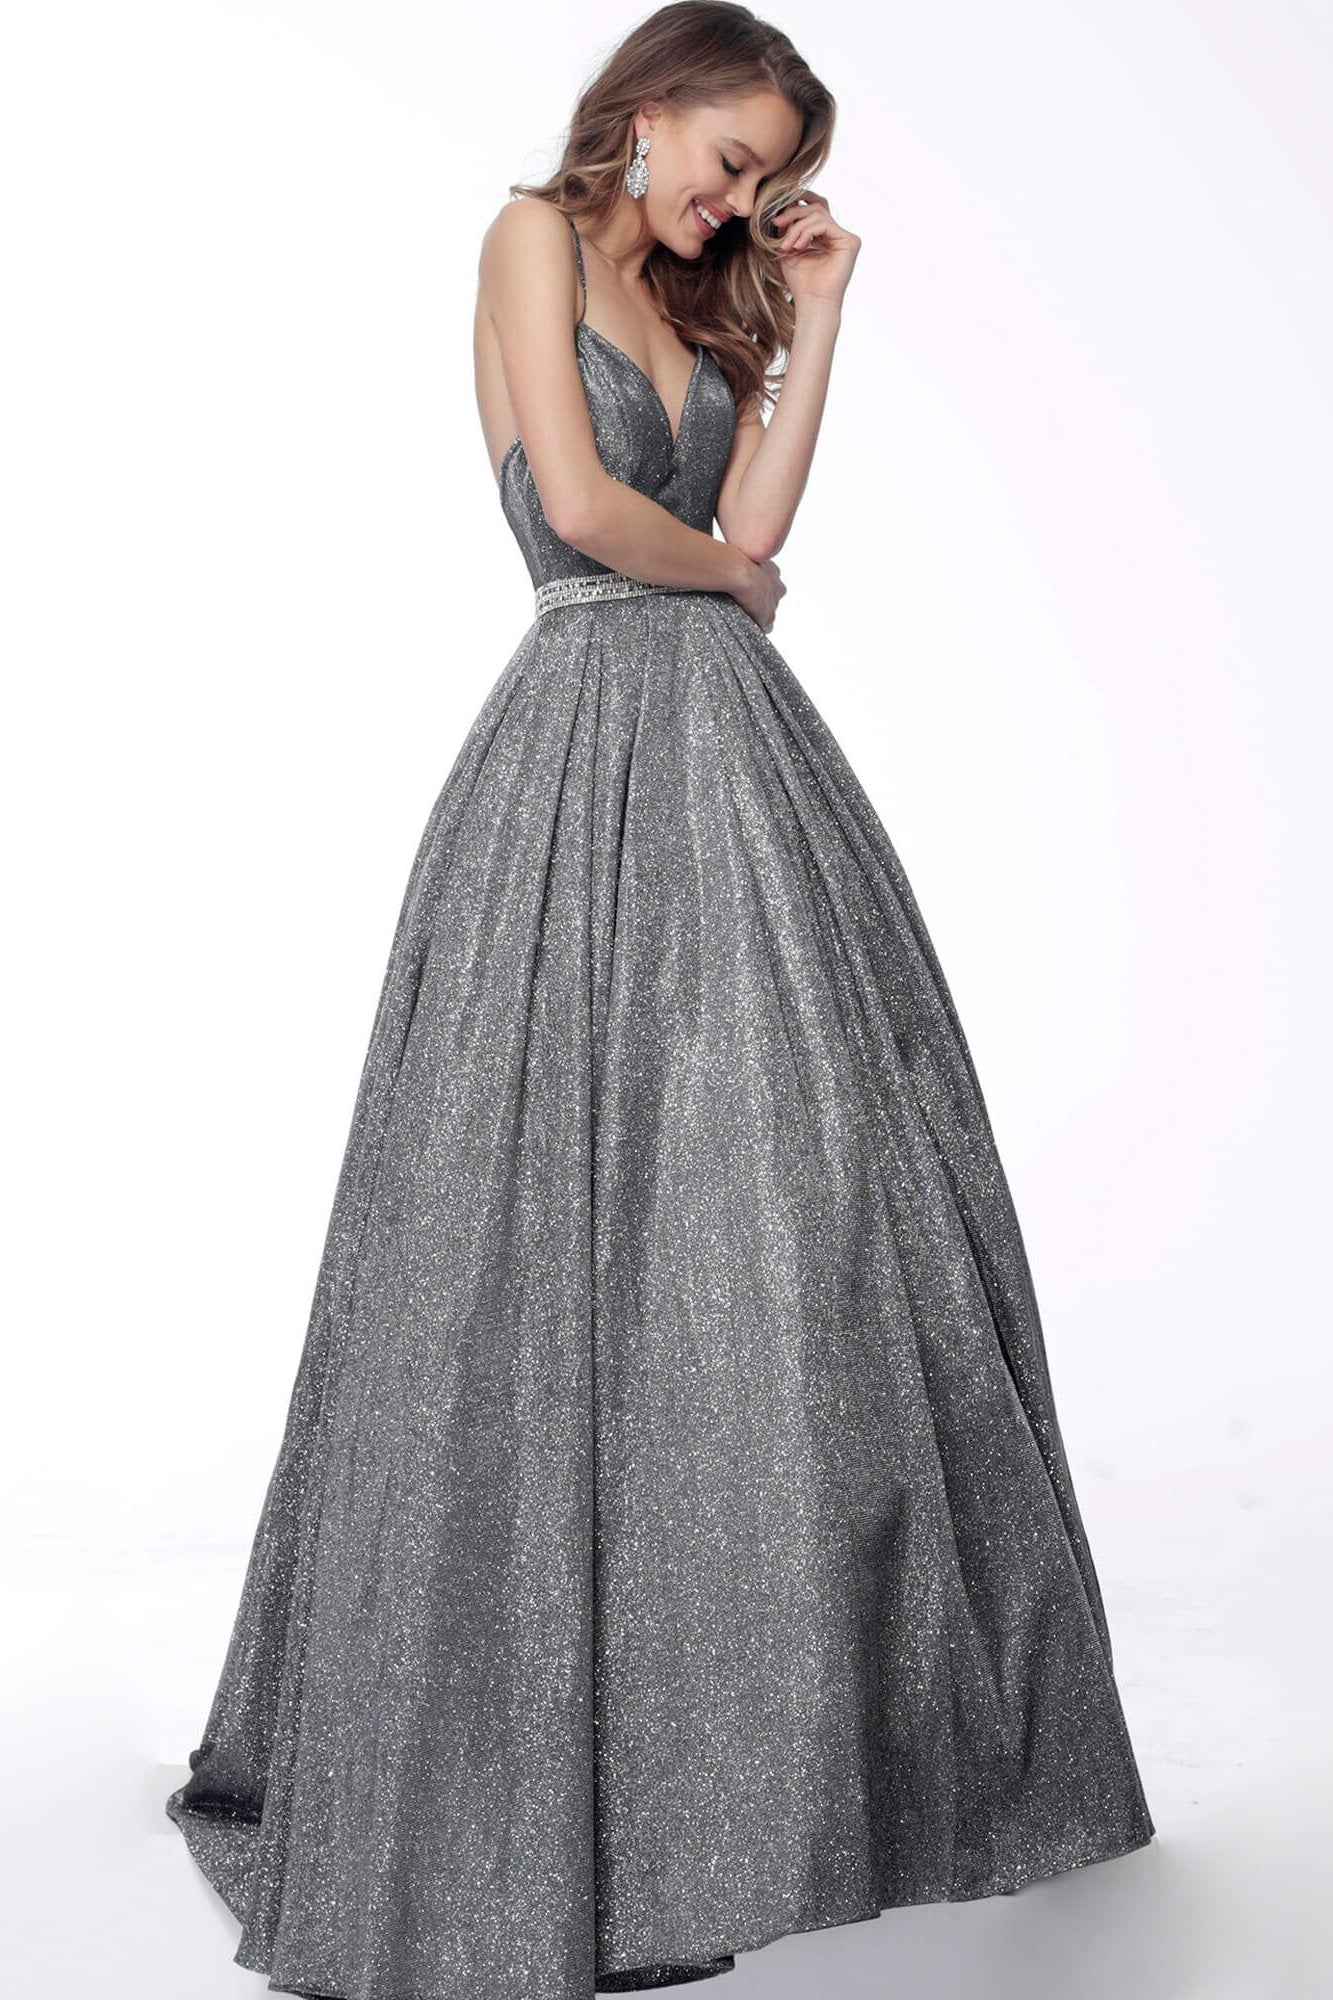 Jovani - 66038 Sweetheart Glittered Ballgown In Gray and Silver